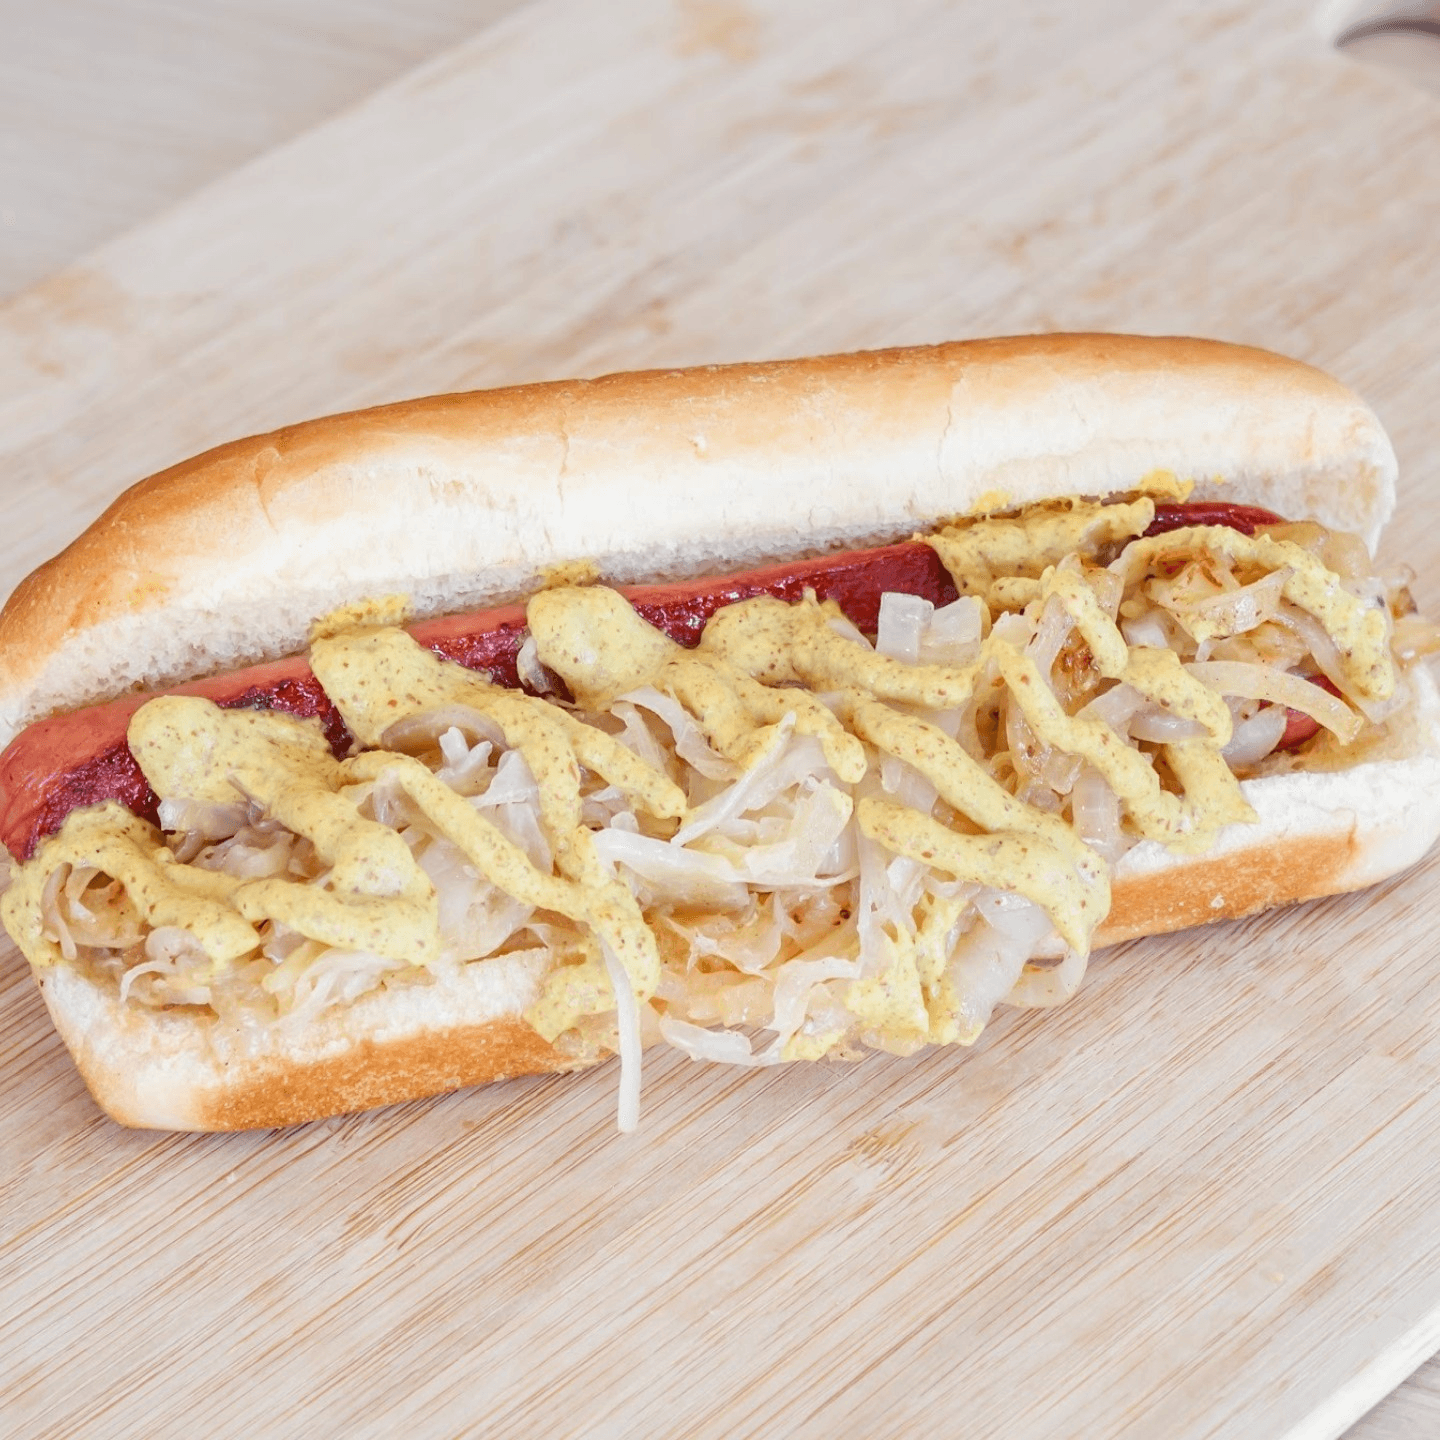 We don’t have just your ordinary hot dogs.